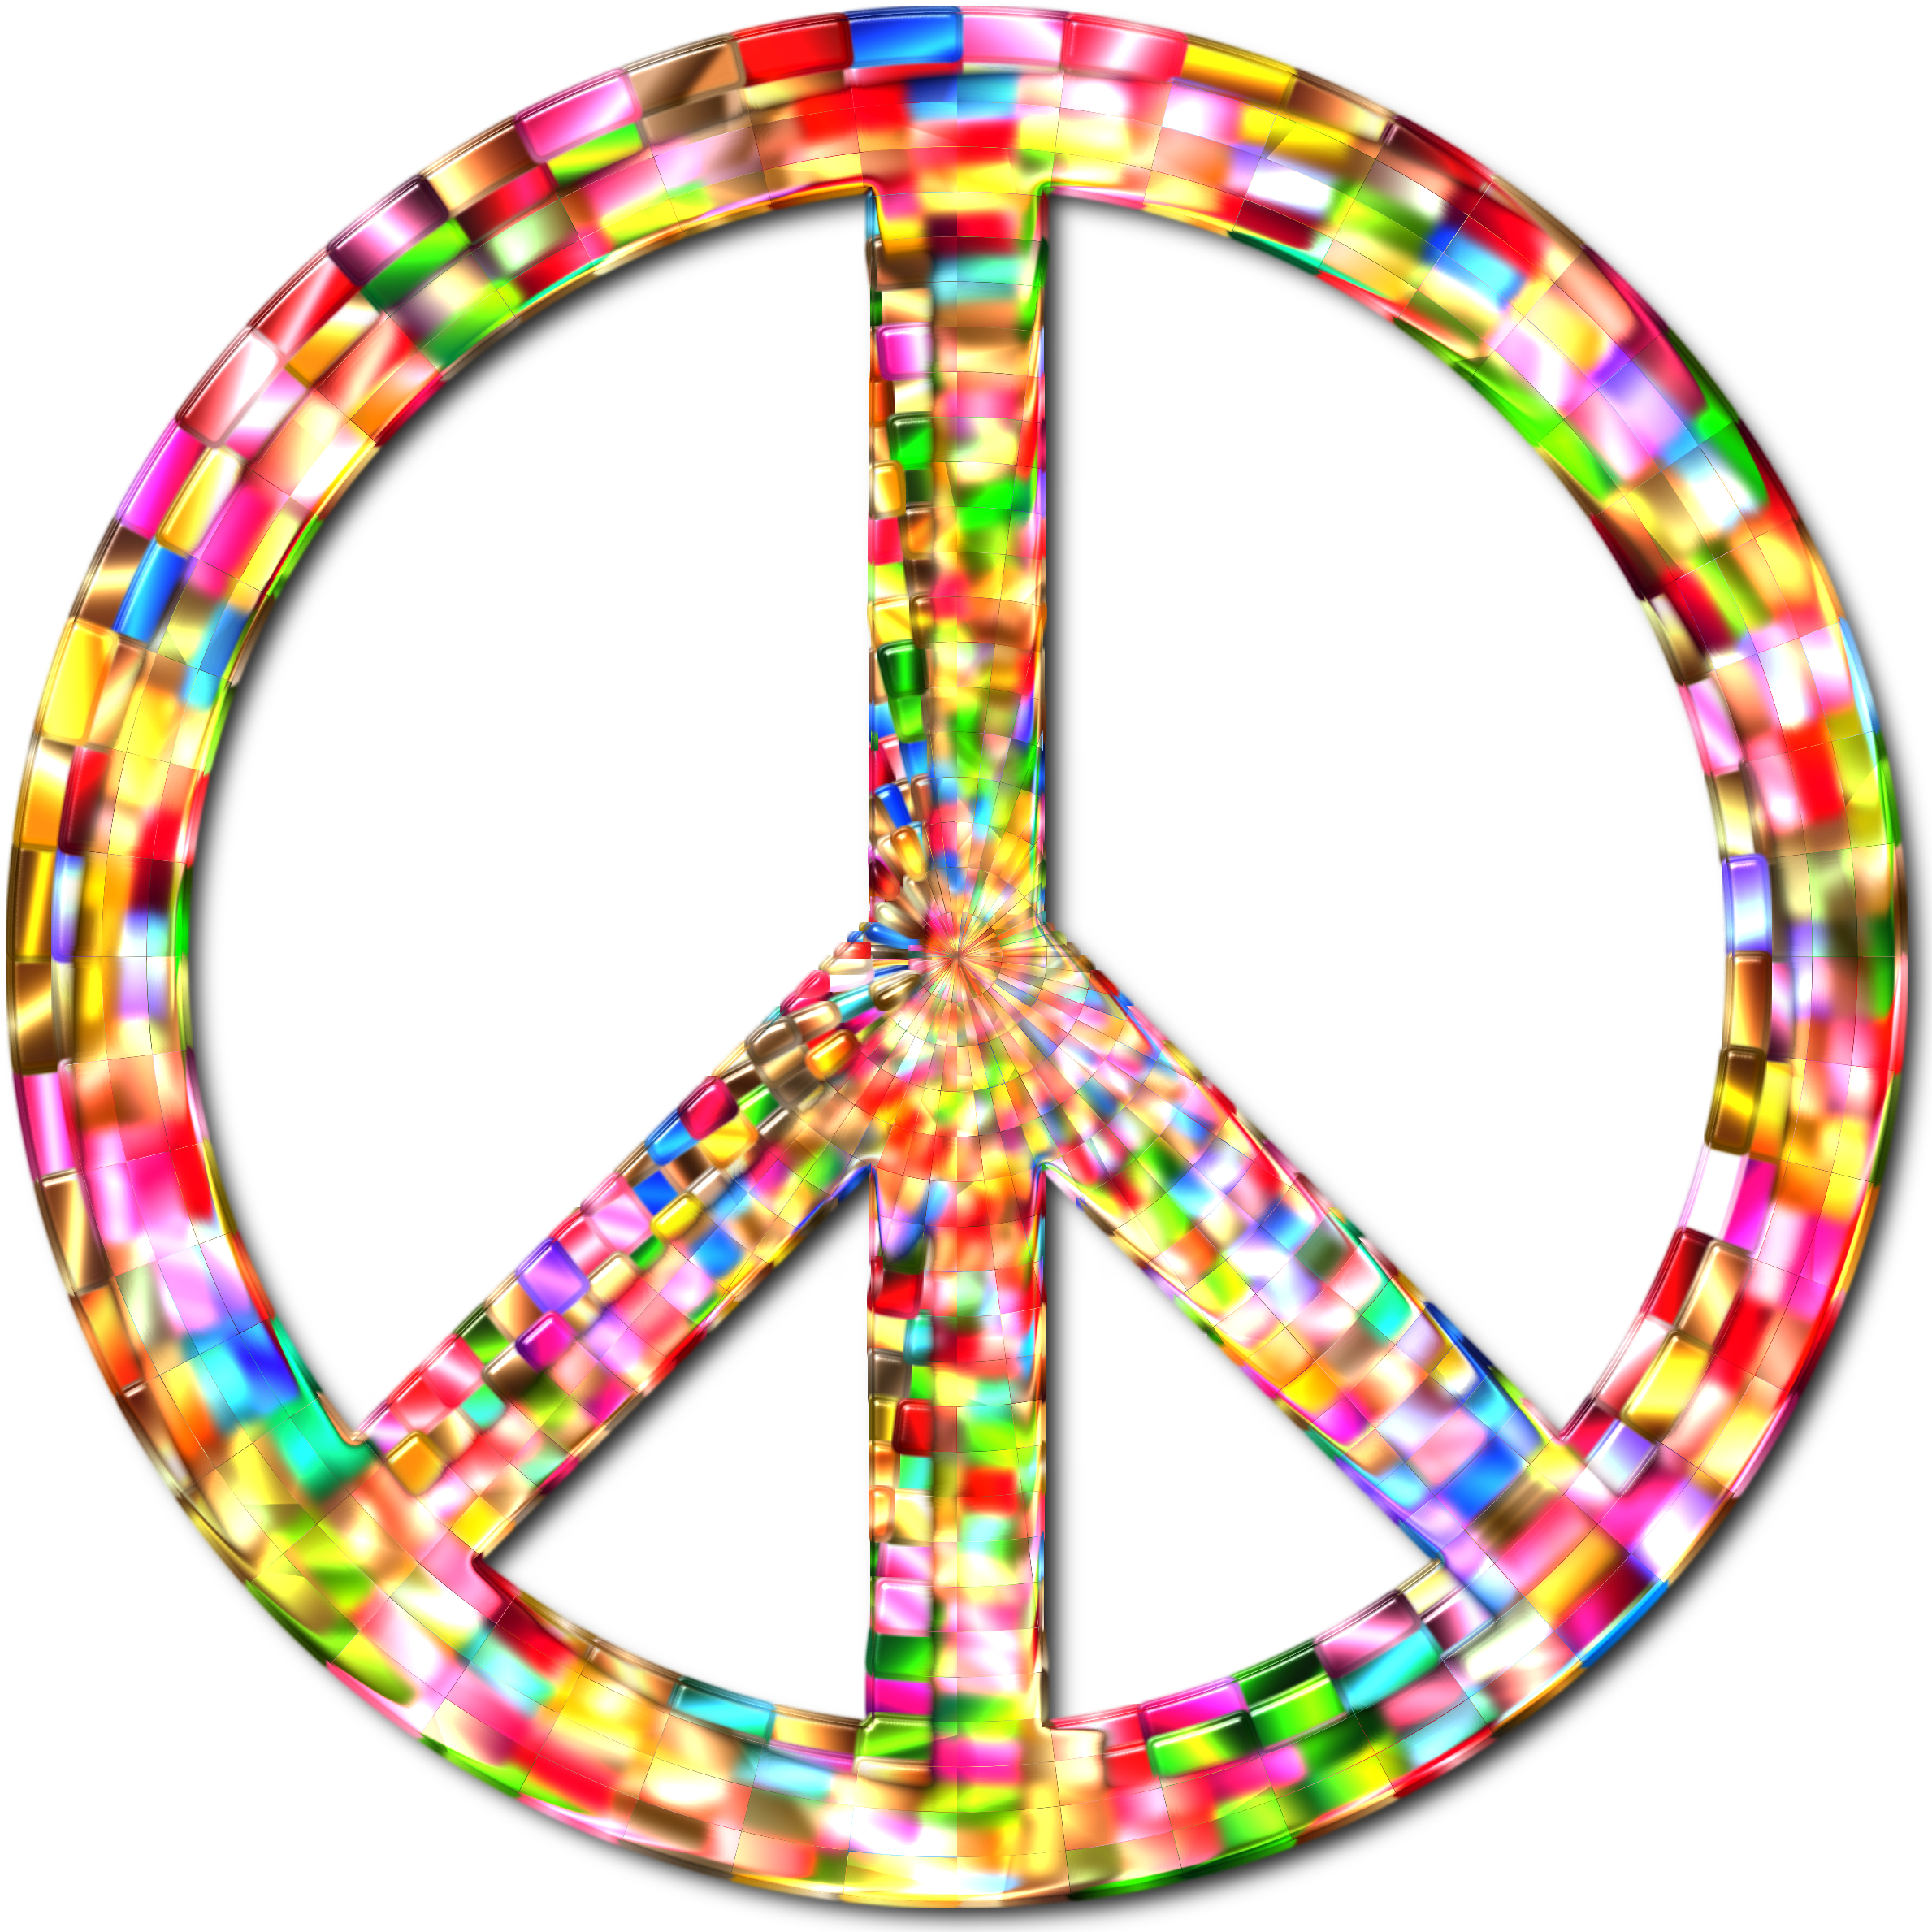 Big Image - Psychedelic Peace Sign Png (2400x2400)